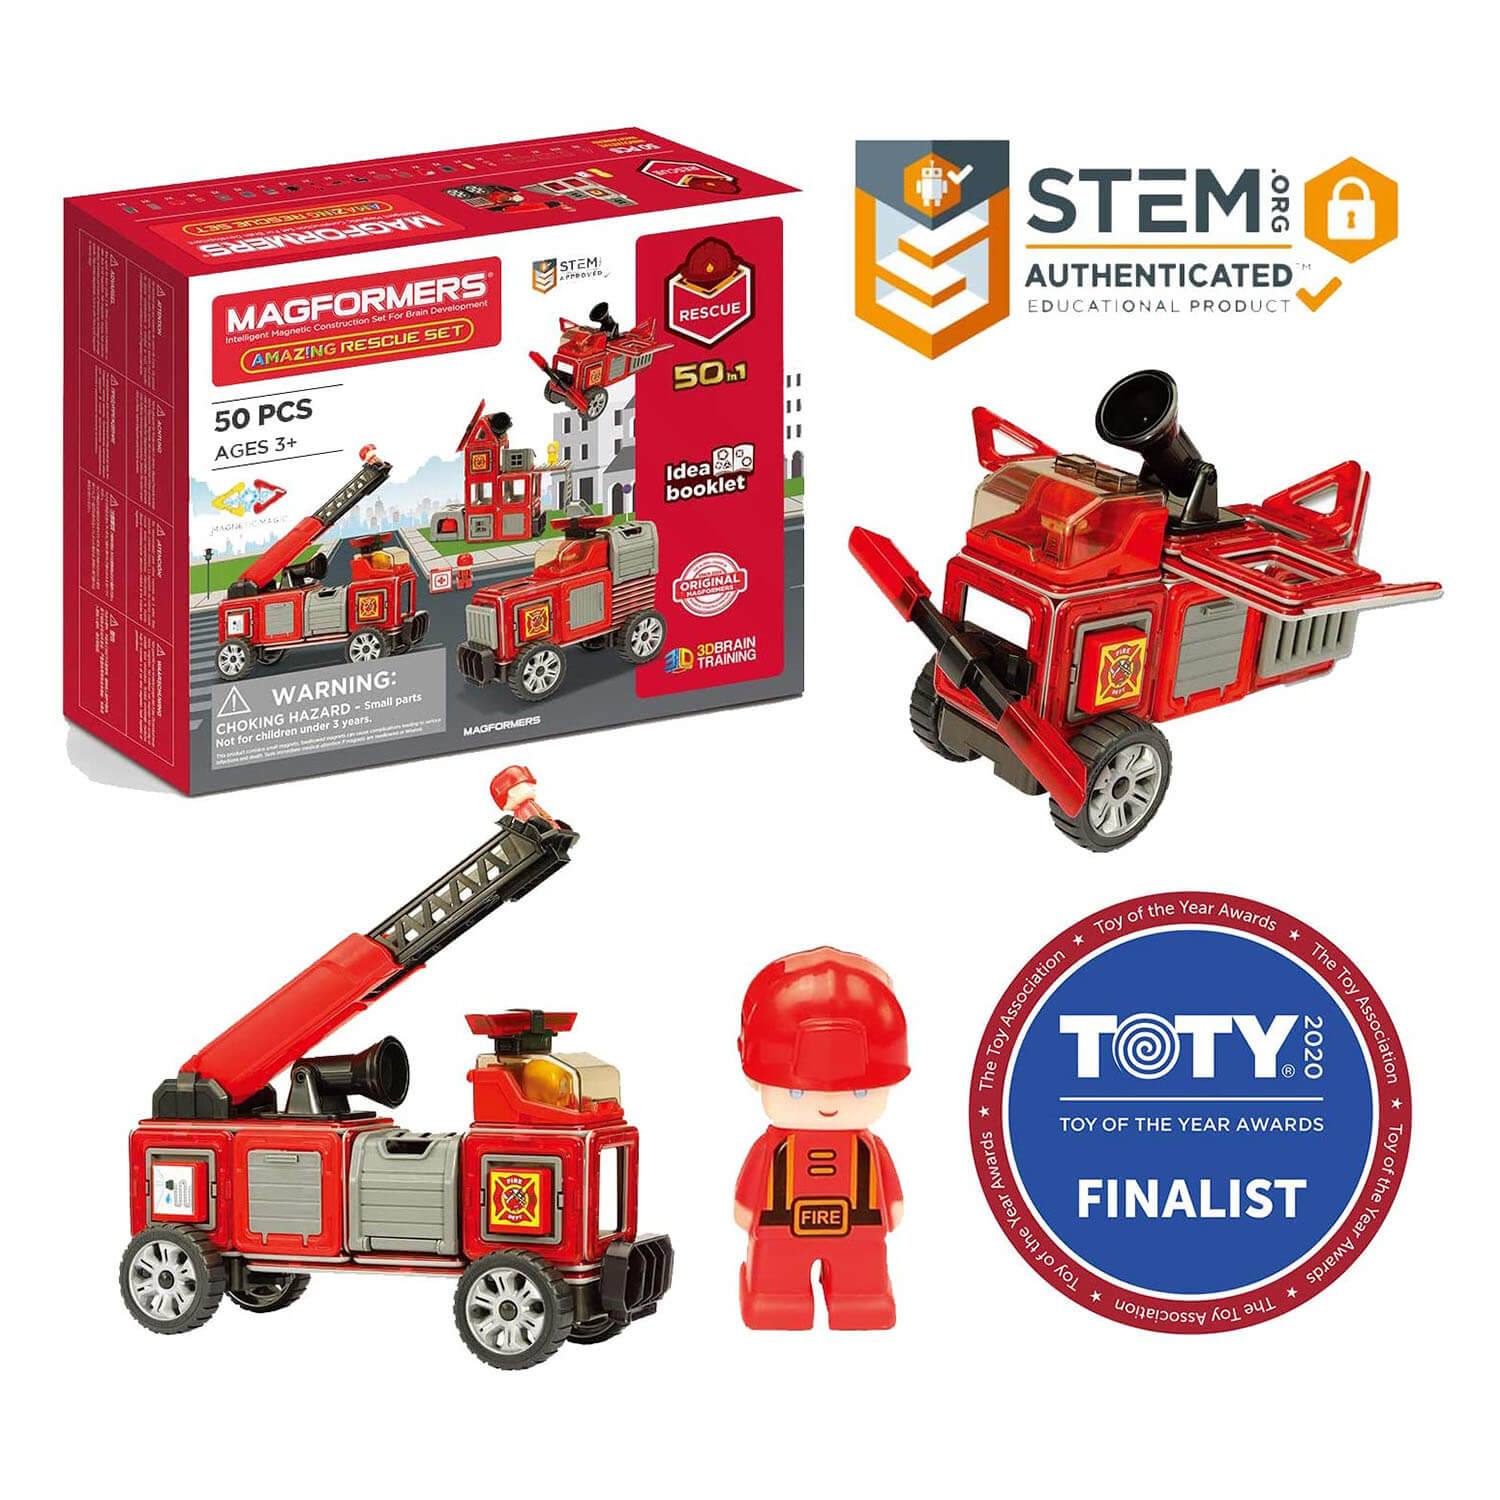 Toys As Tools Educational Toy Reviews: Review: Magformers 30 Piece